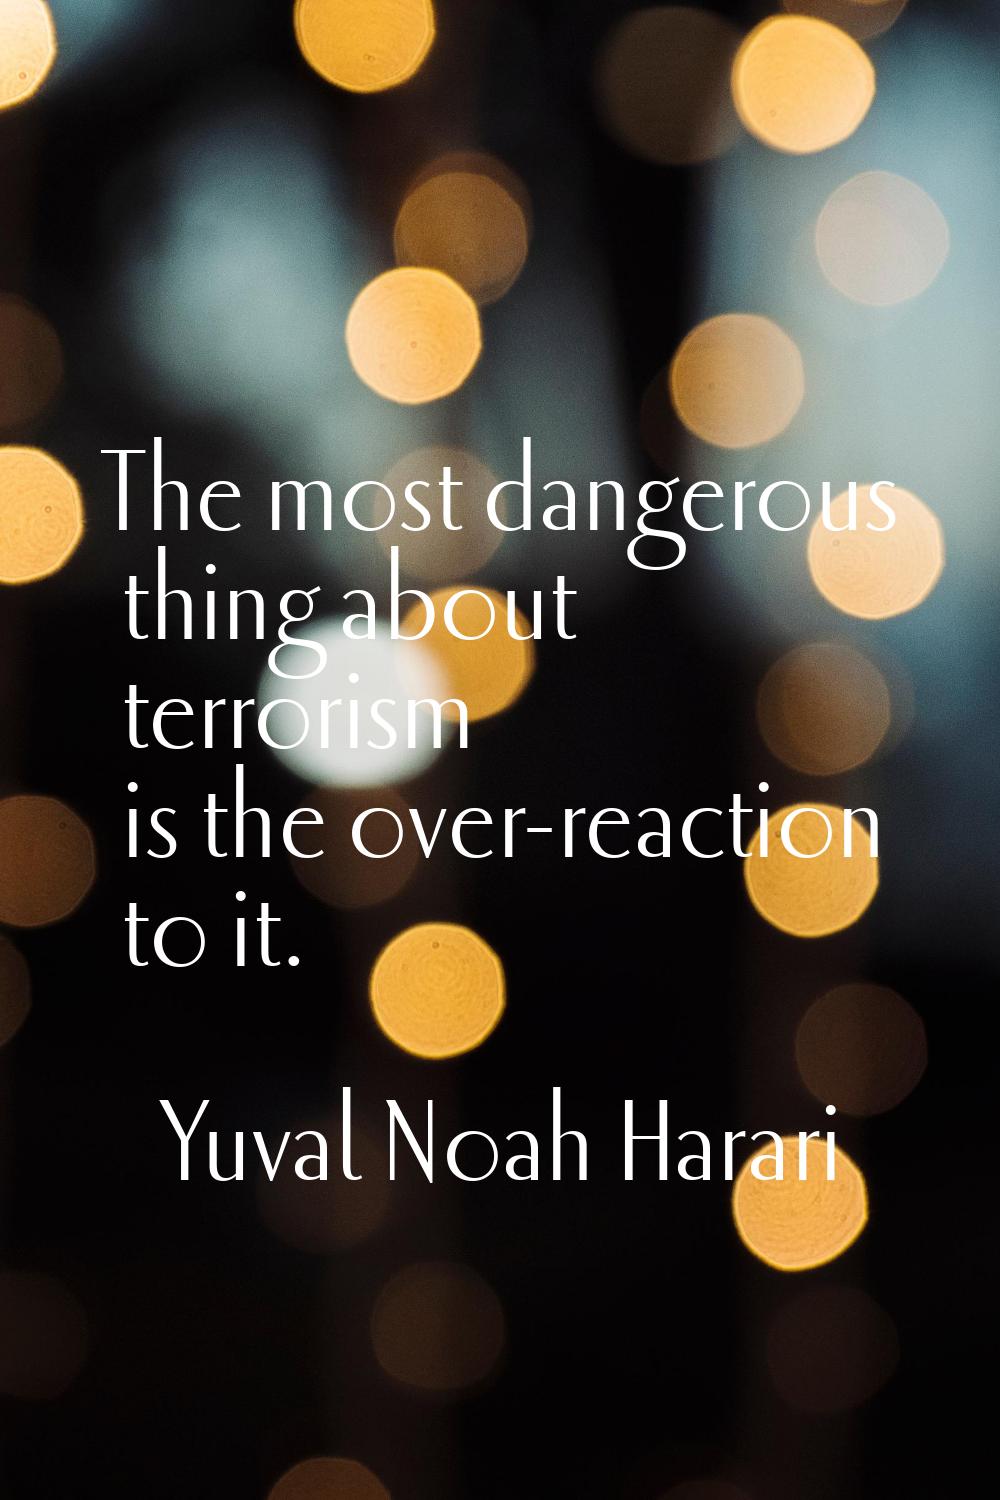 The most dangerous thing about terrorism is the over-reaction to it.